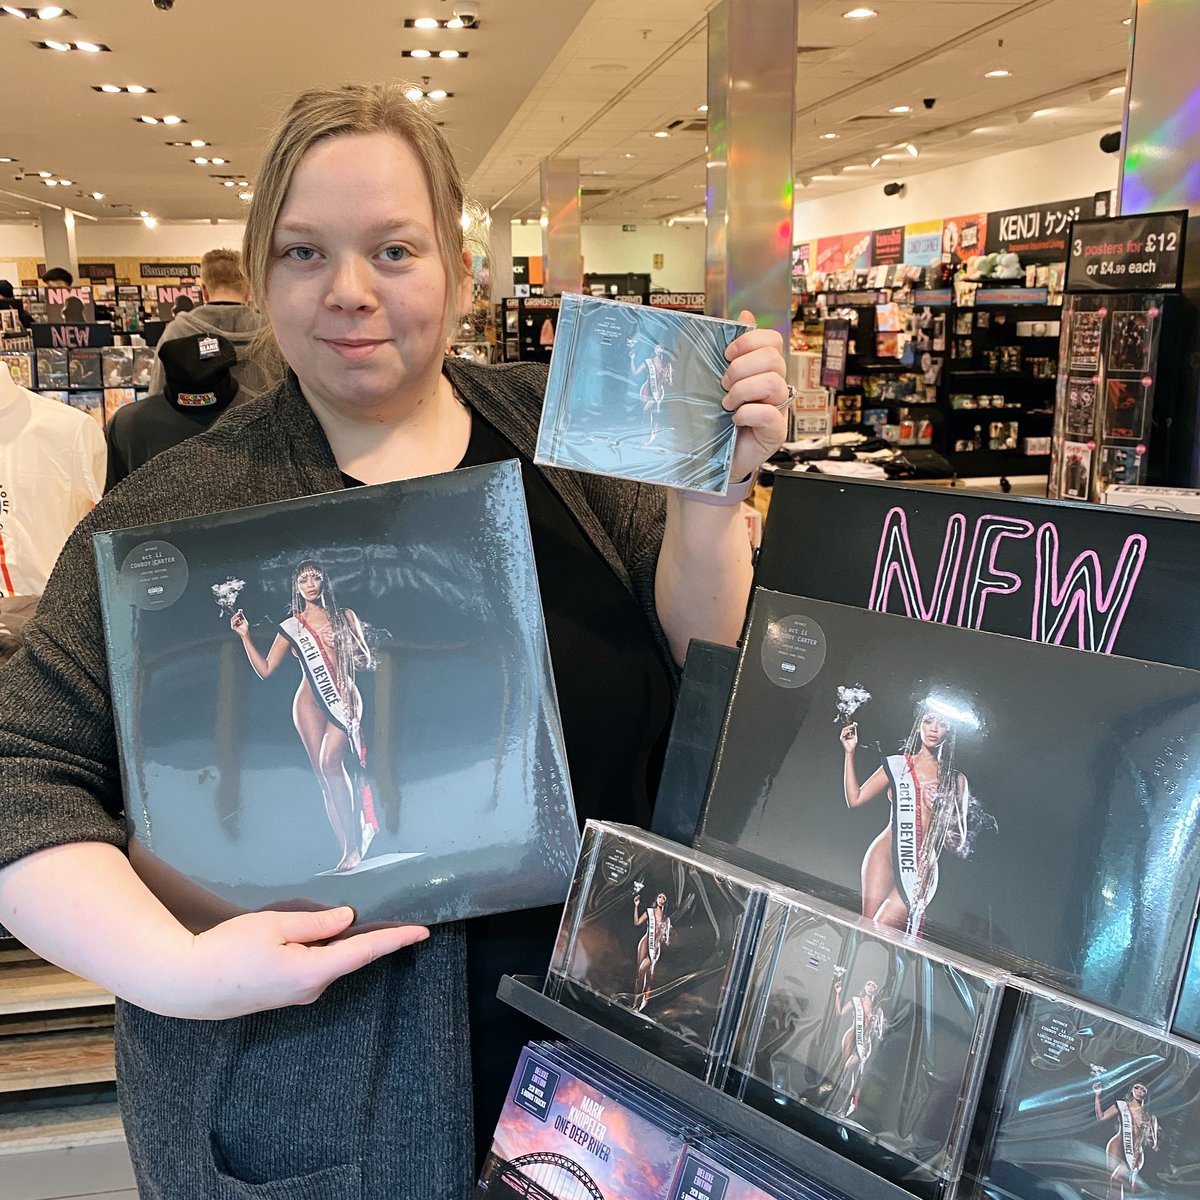 It’s #CowboyCarter day! We have the four CD versions and the vinyl but very limited quantities. Get em while you can. • #Beyonce #hmvLovesVinyl #TexasHoldEm